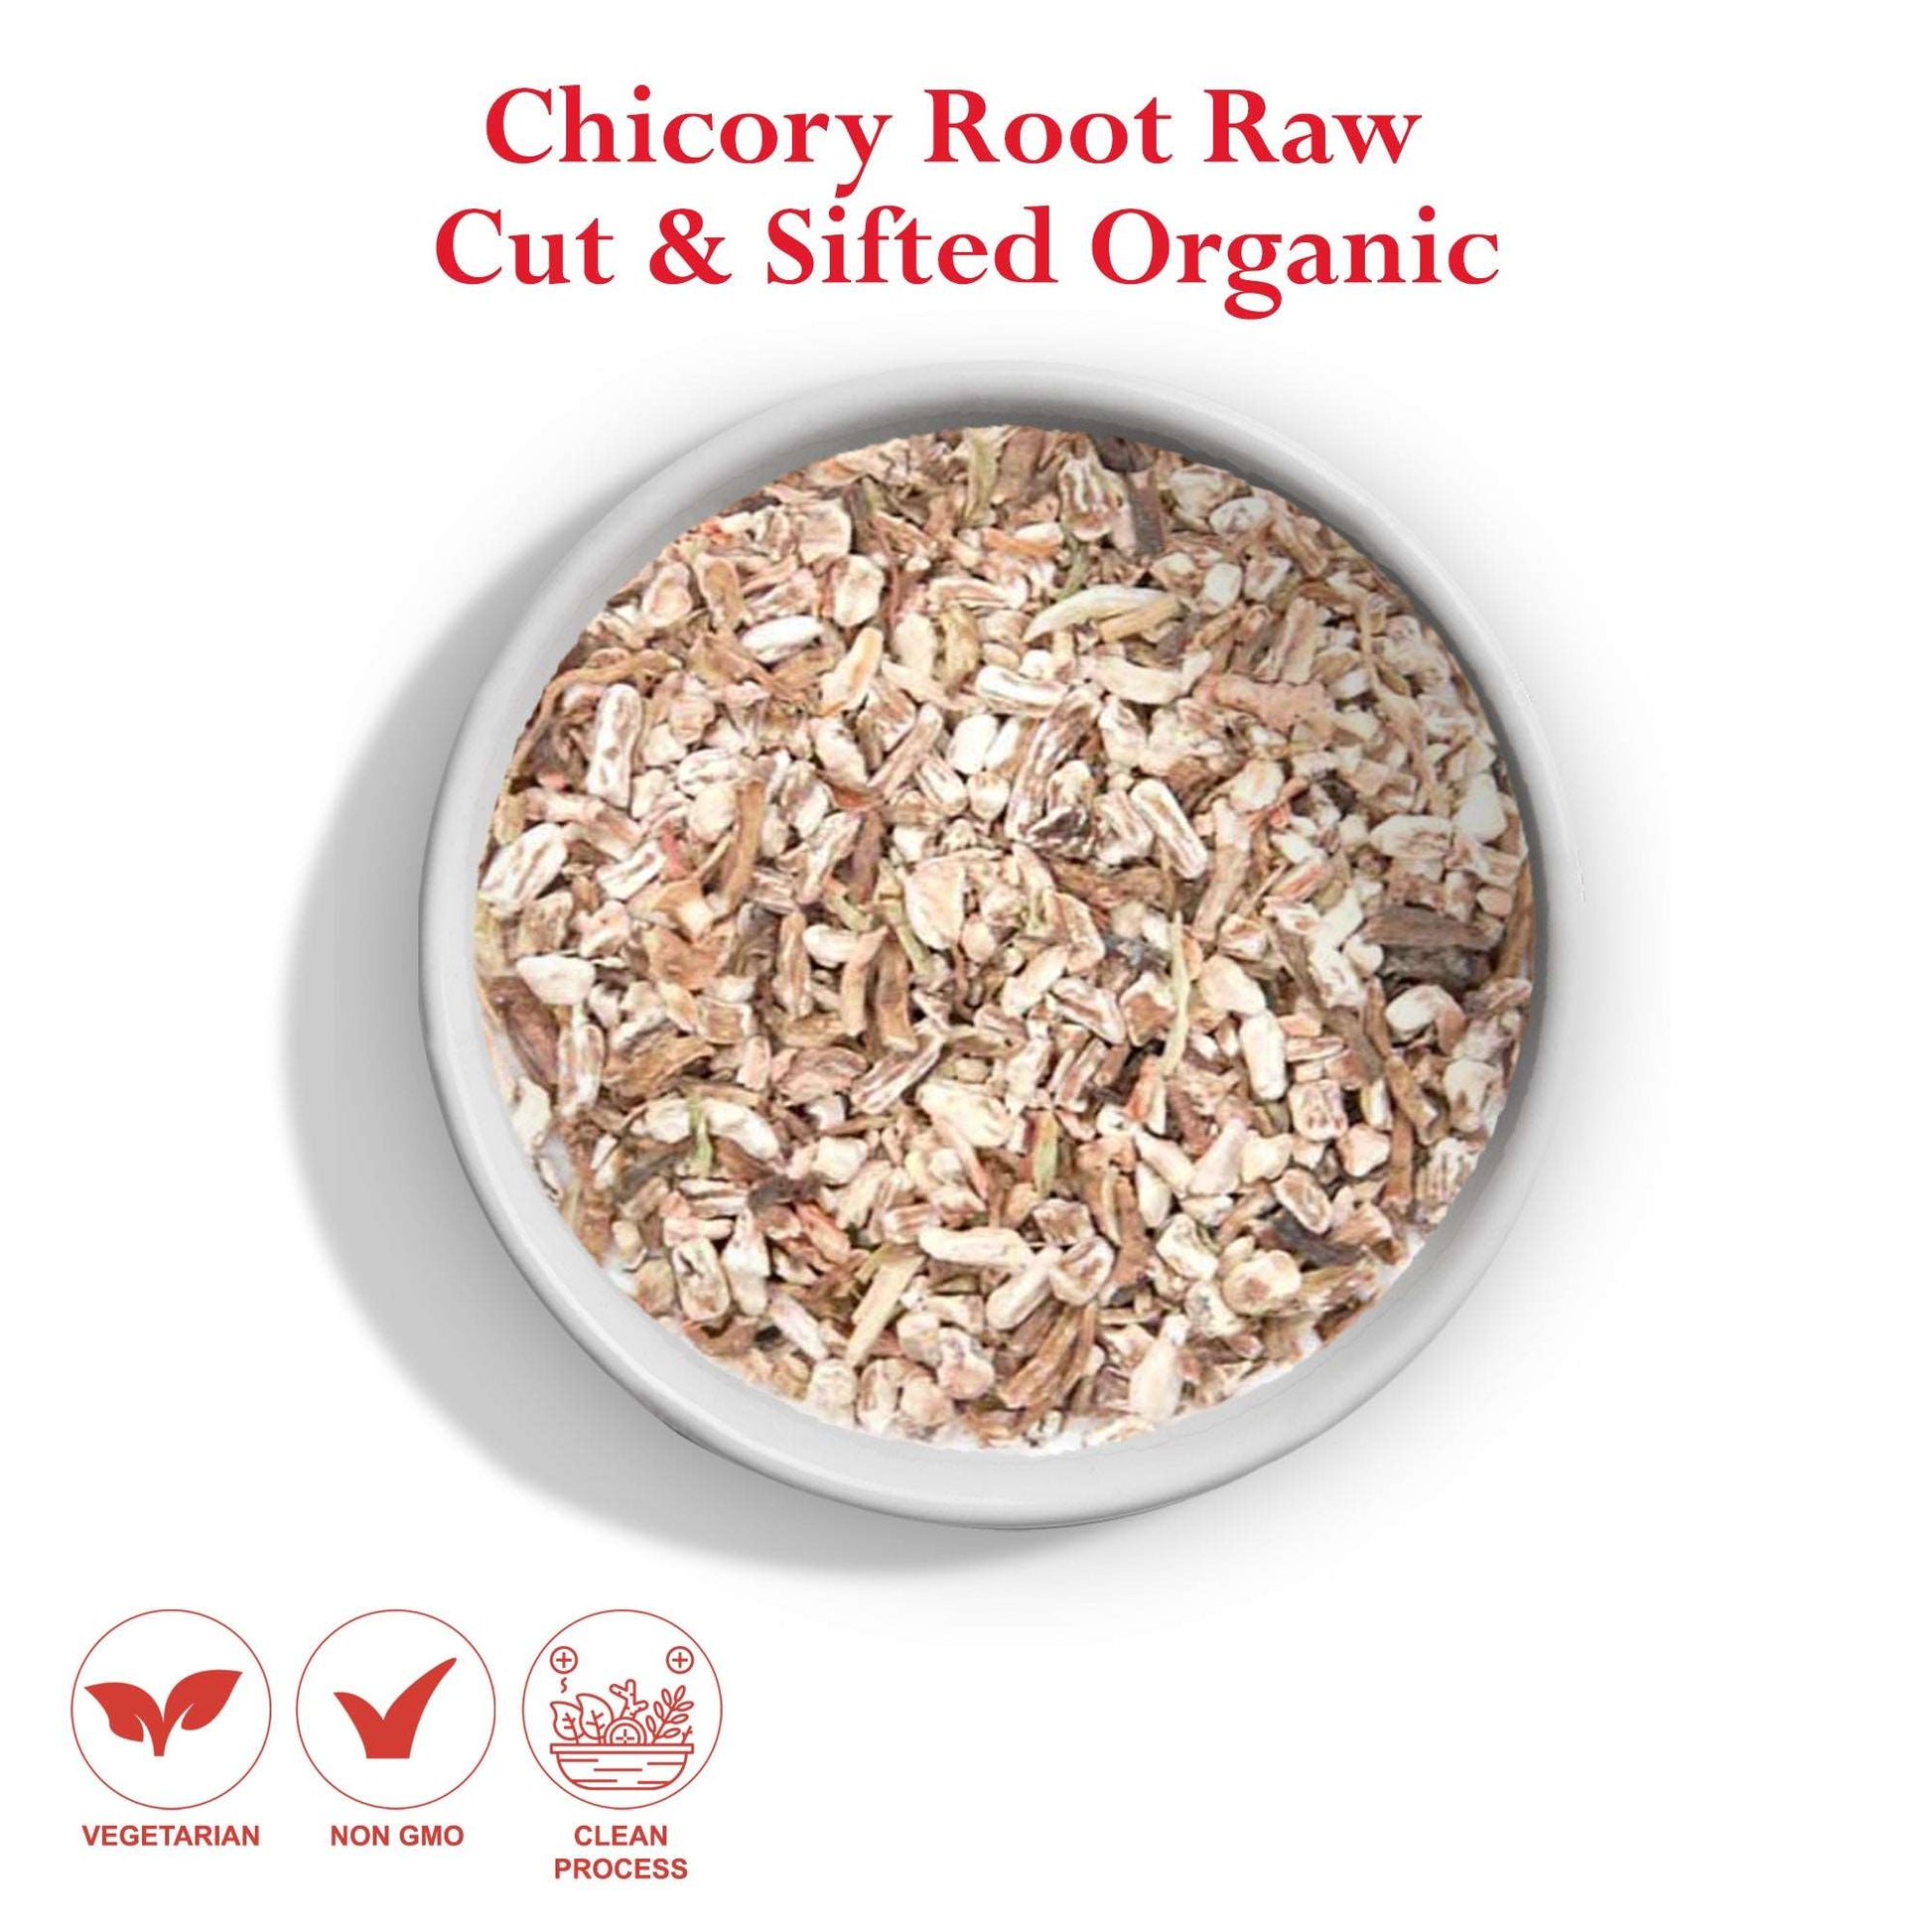 Chicory Root Raw Cut & Sifted Organic